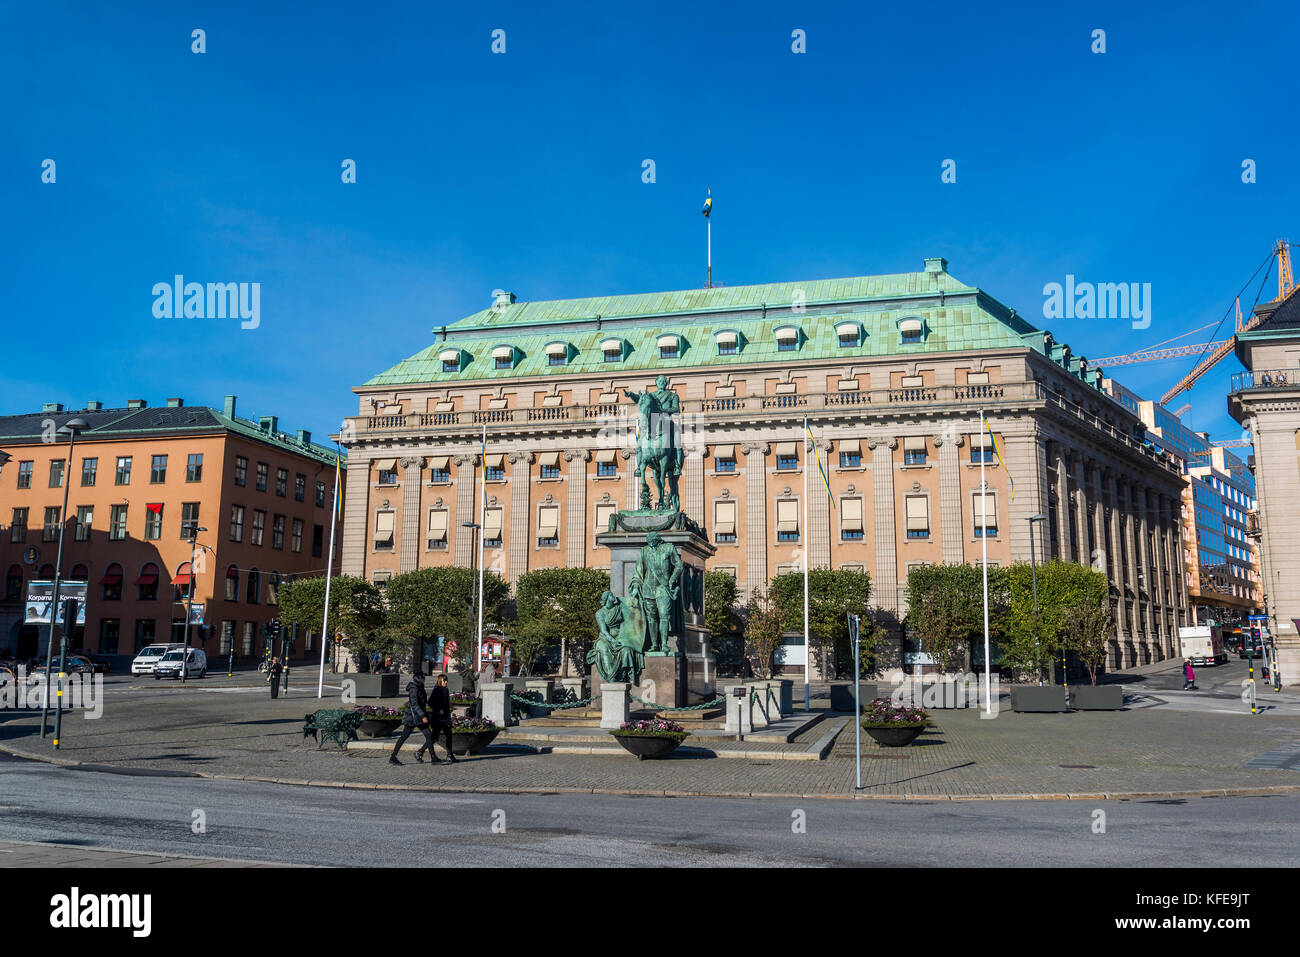 Gustav Adolfs Torg, public square with the Equestrian statue of King Gustav II Adolf, Norrmalm, Stockholm, Sweden Stock Photo